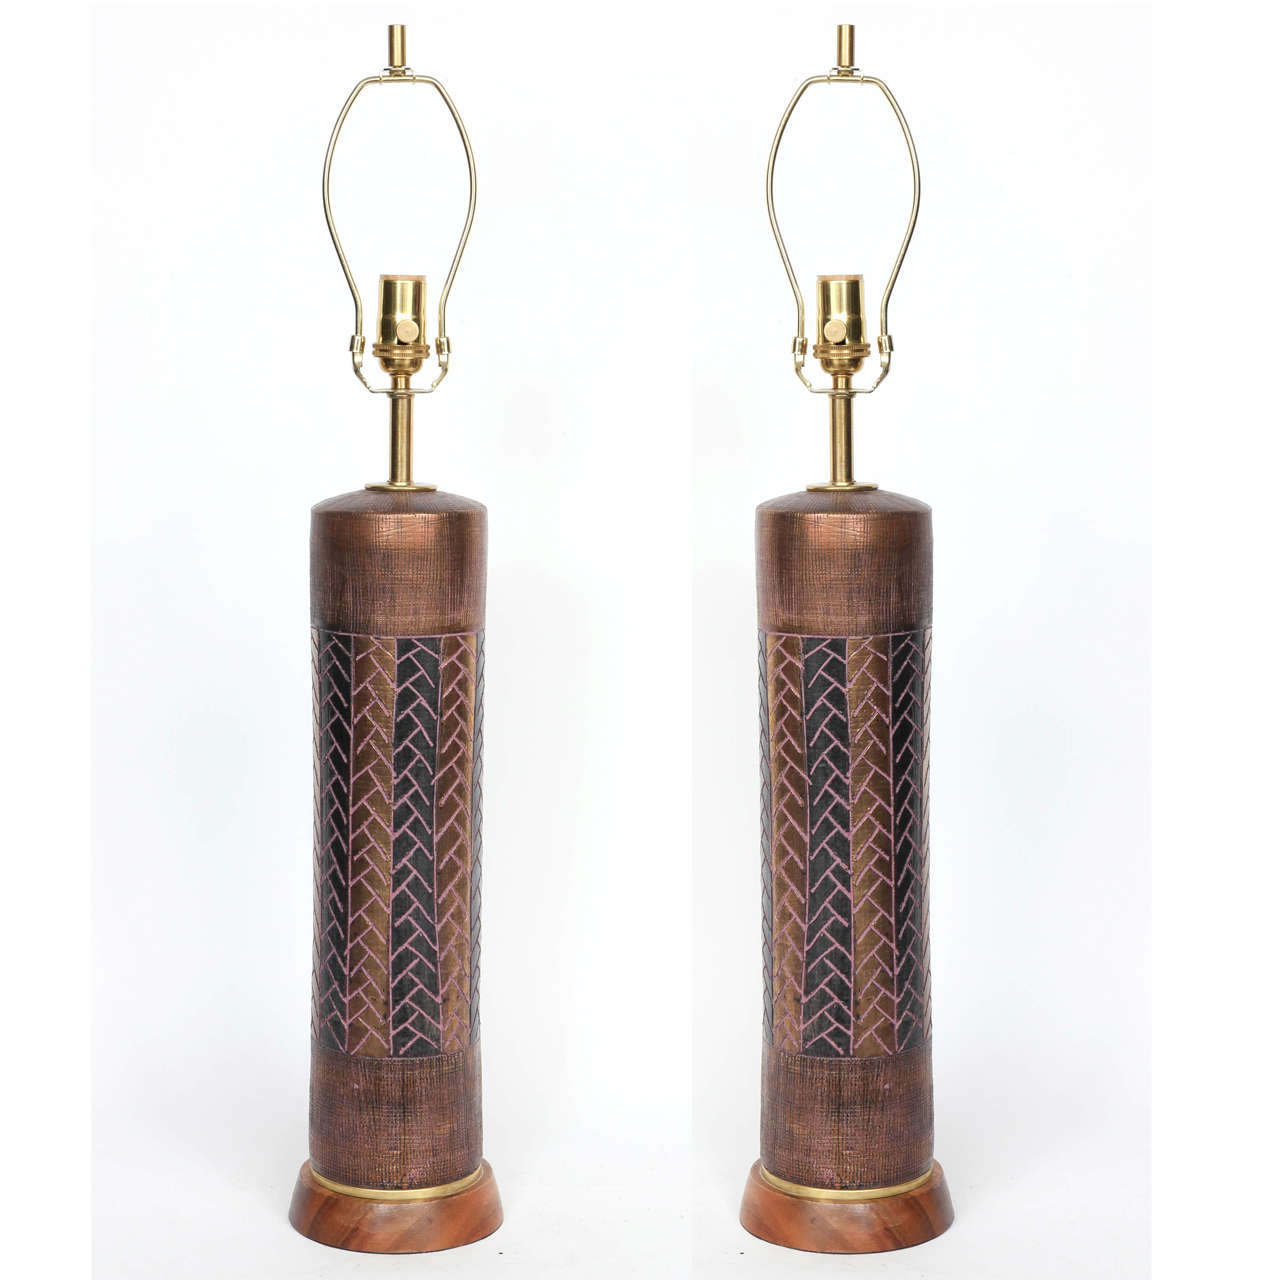 Pair of Italian ceramic lamps with a graphic pattern glaze with incised details. Lamps are on a turned walnut base and have been rewired for use in the USA with brown silk cords.